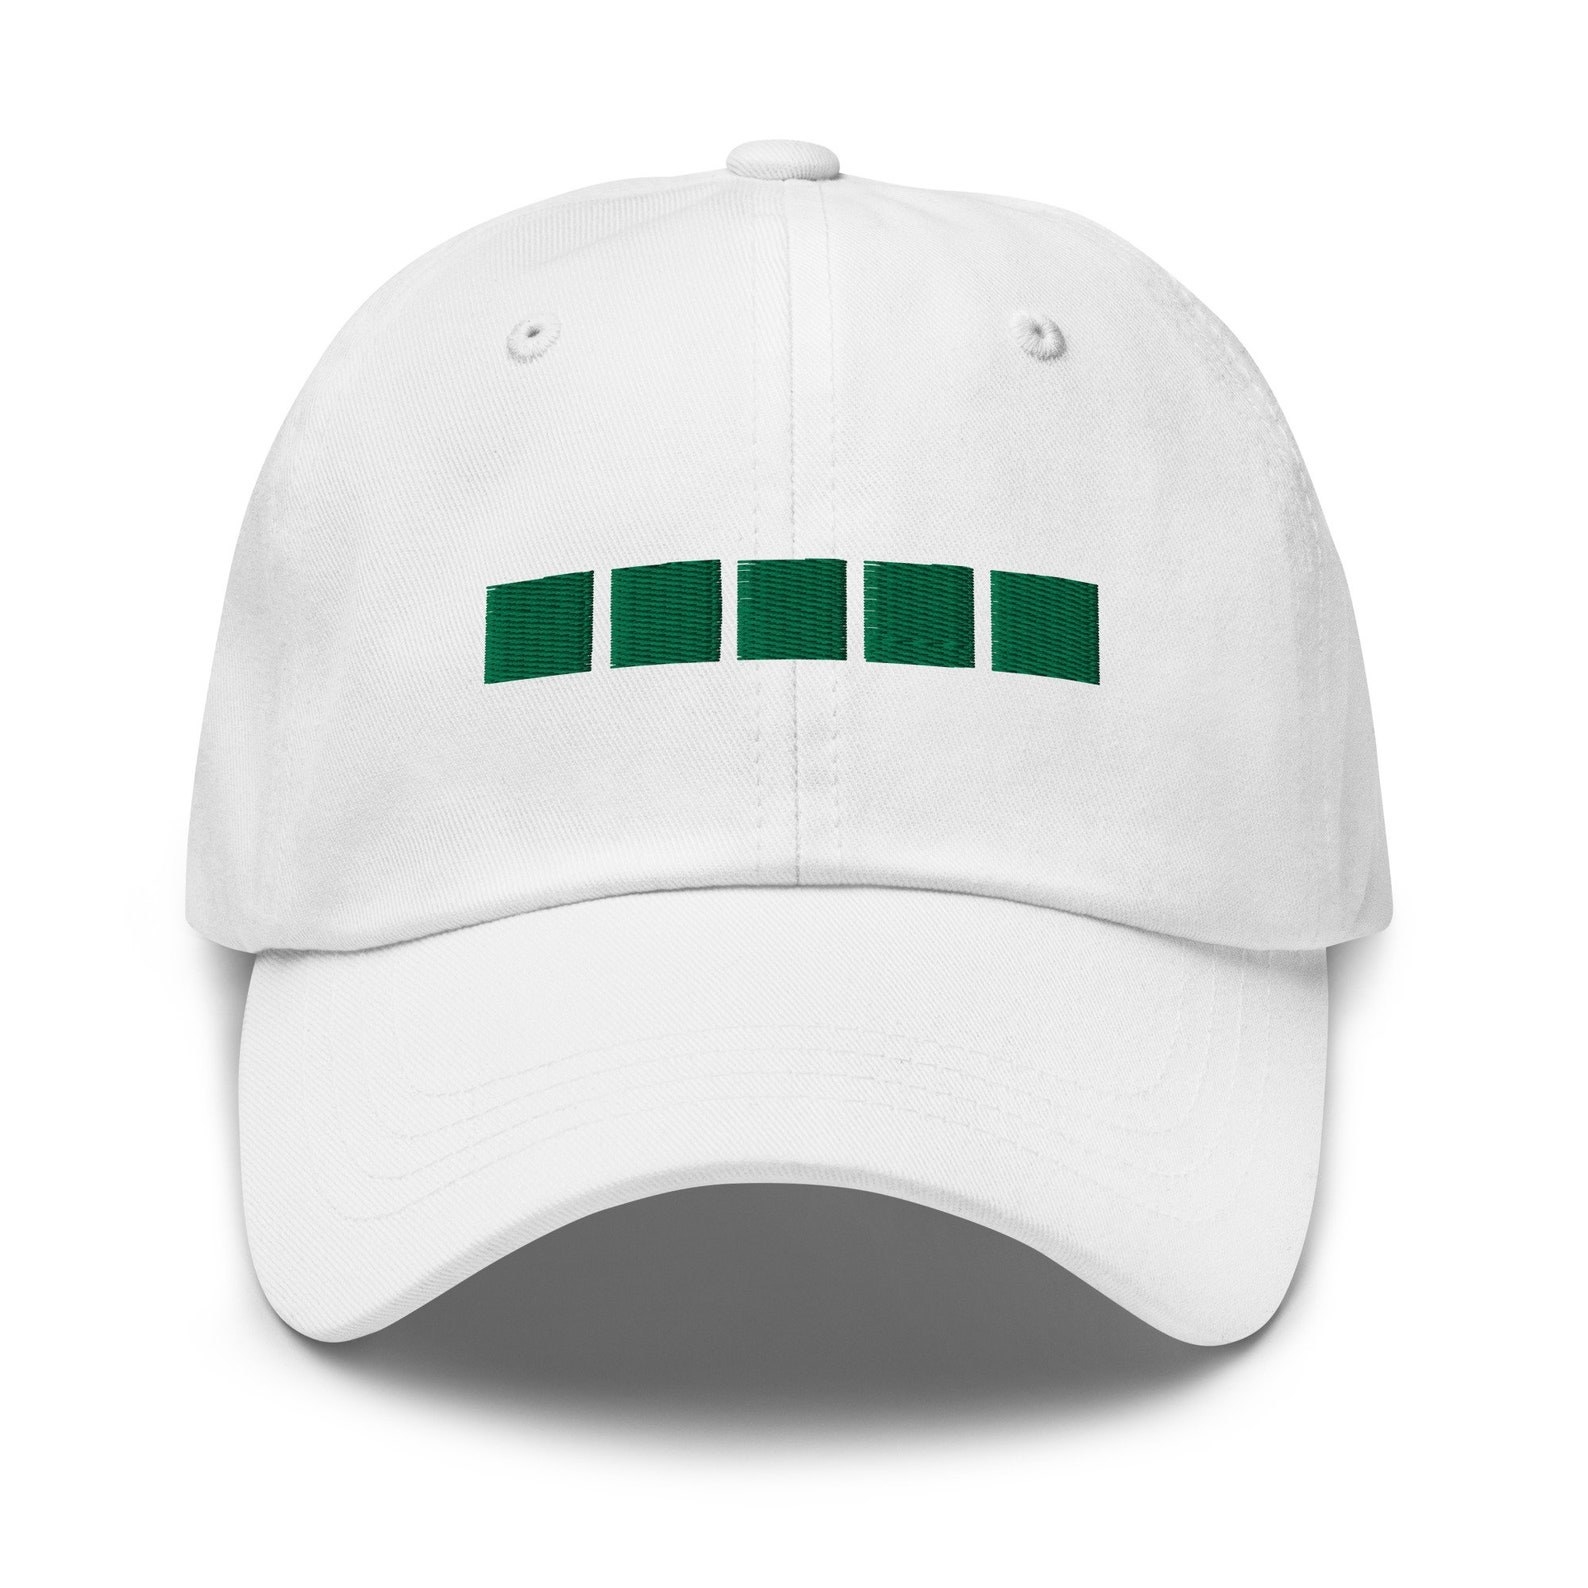 white baseball cap with five green tiles on it